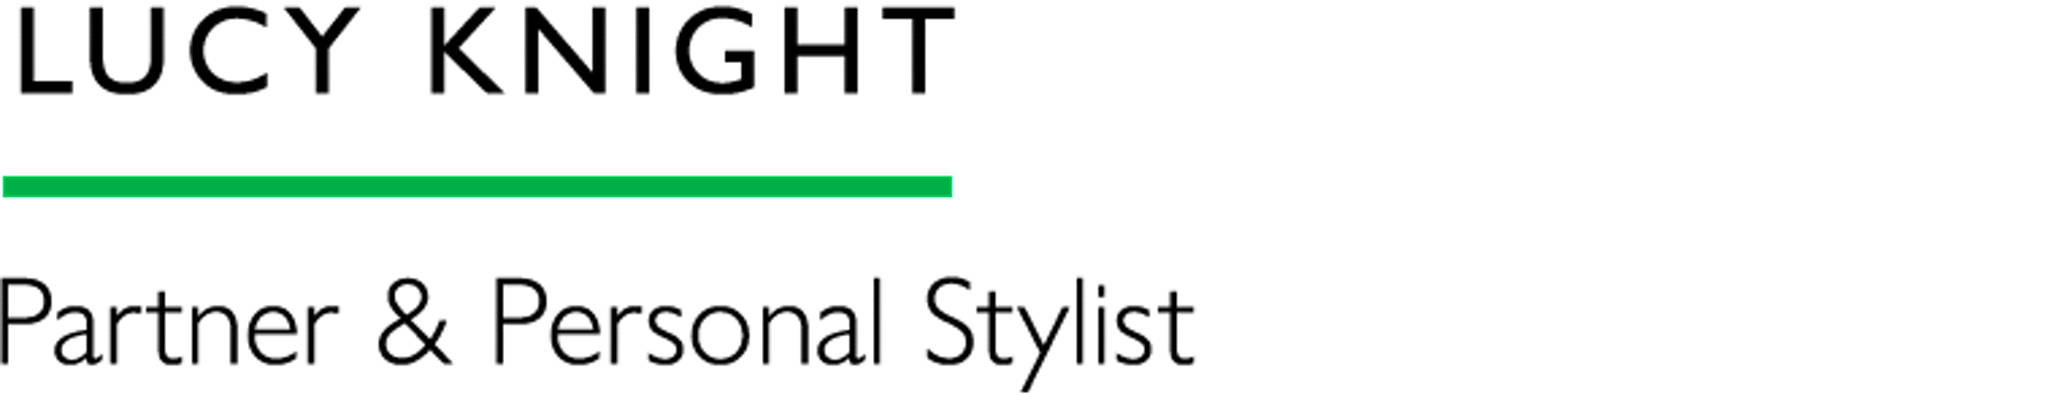 Lucy Knight - Partner & Personal Stylist